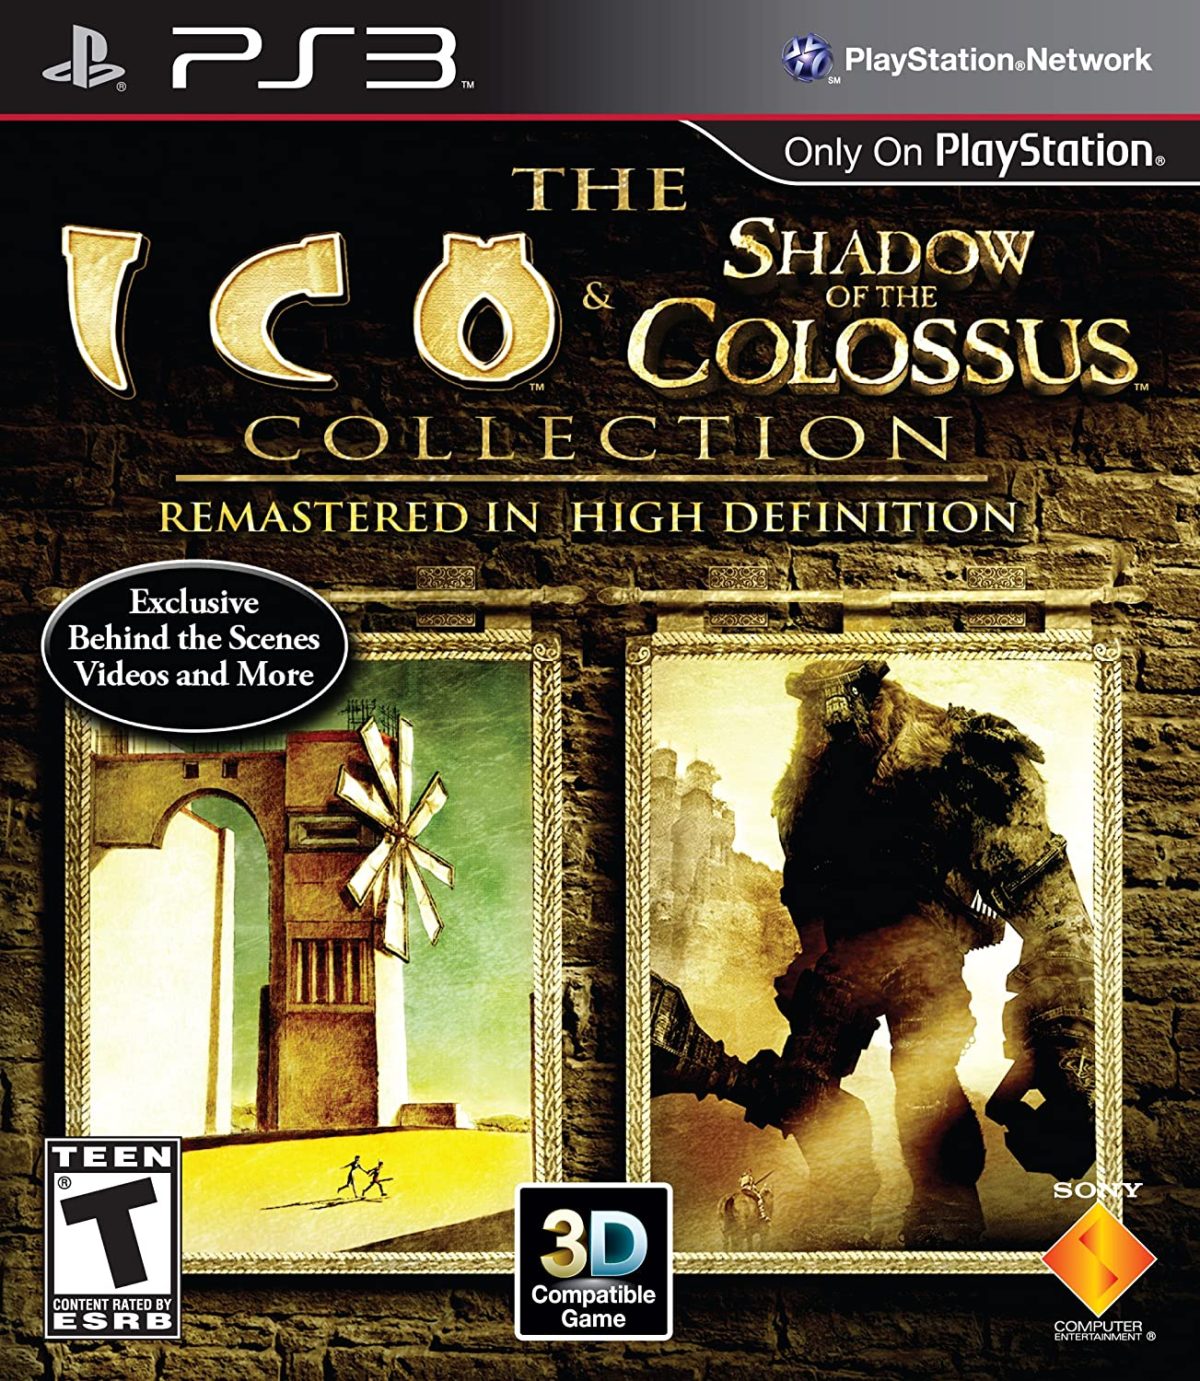 Ico & Shadow of the Colossus Collection player count stats